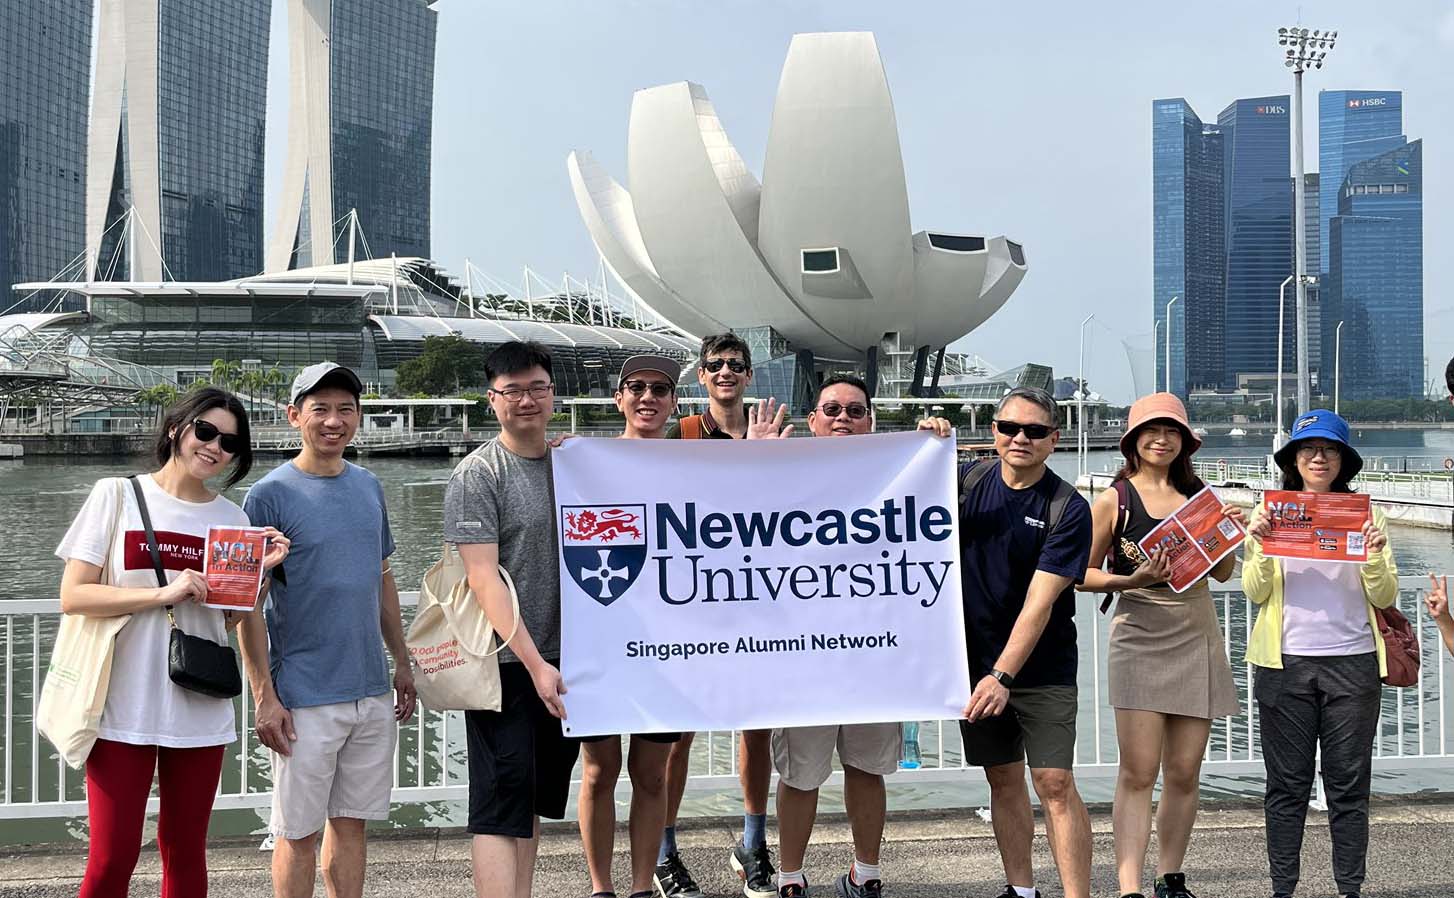 Five members of the Newcastle University Singapore Alumni Network smiling at the camera at a recent event.